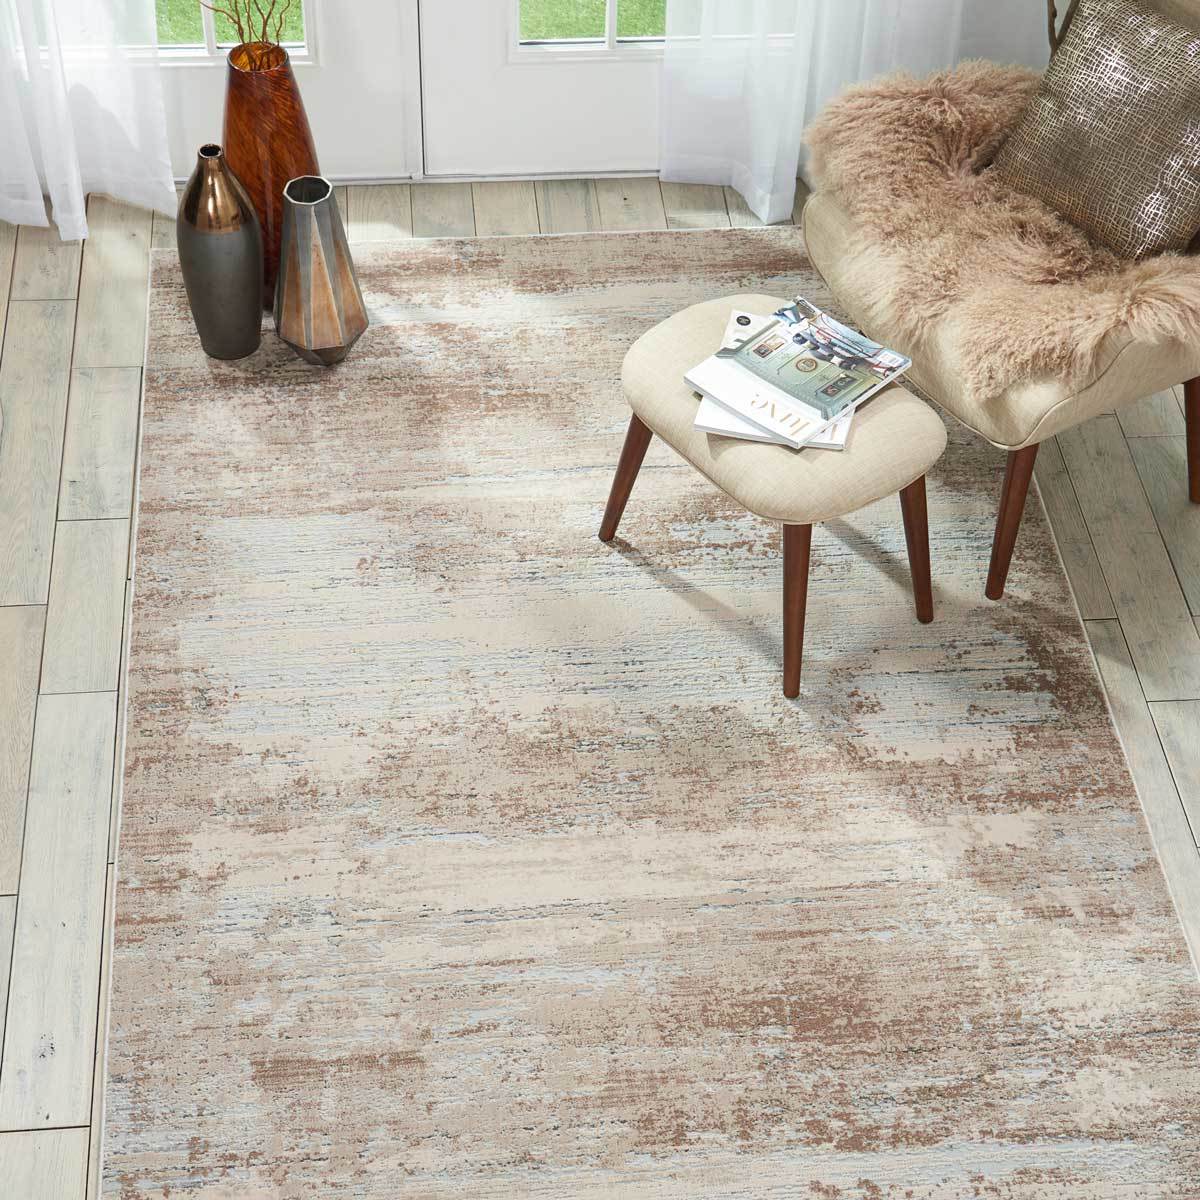 Rustic Textures Blended Beige Rug in 3 Sizes